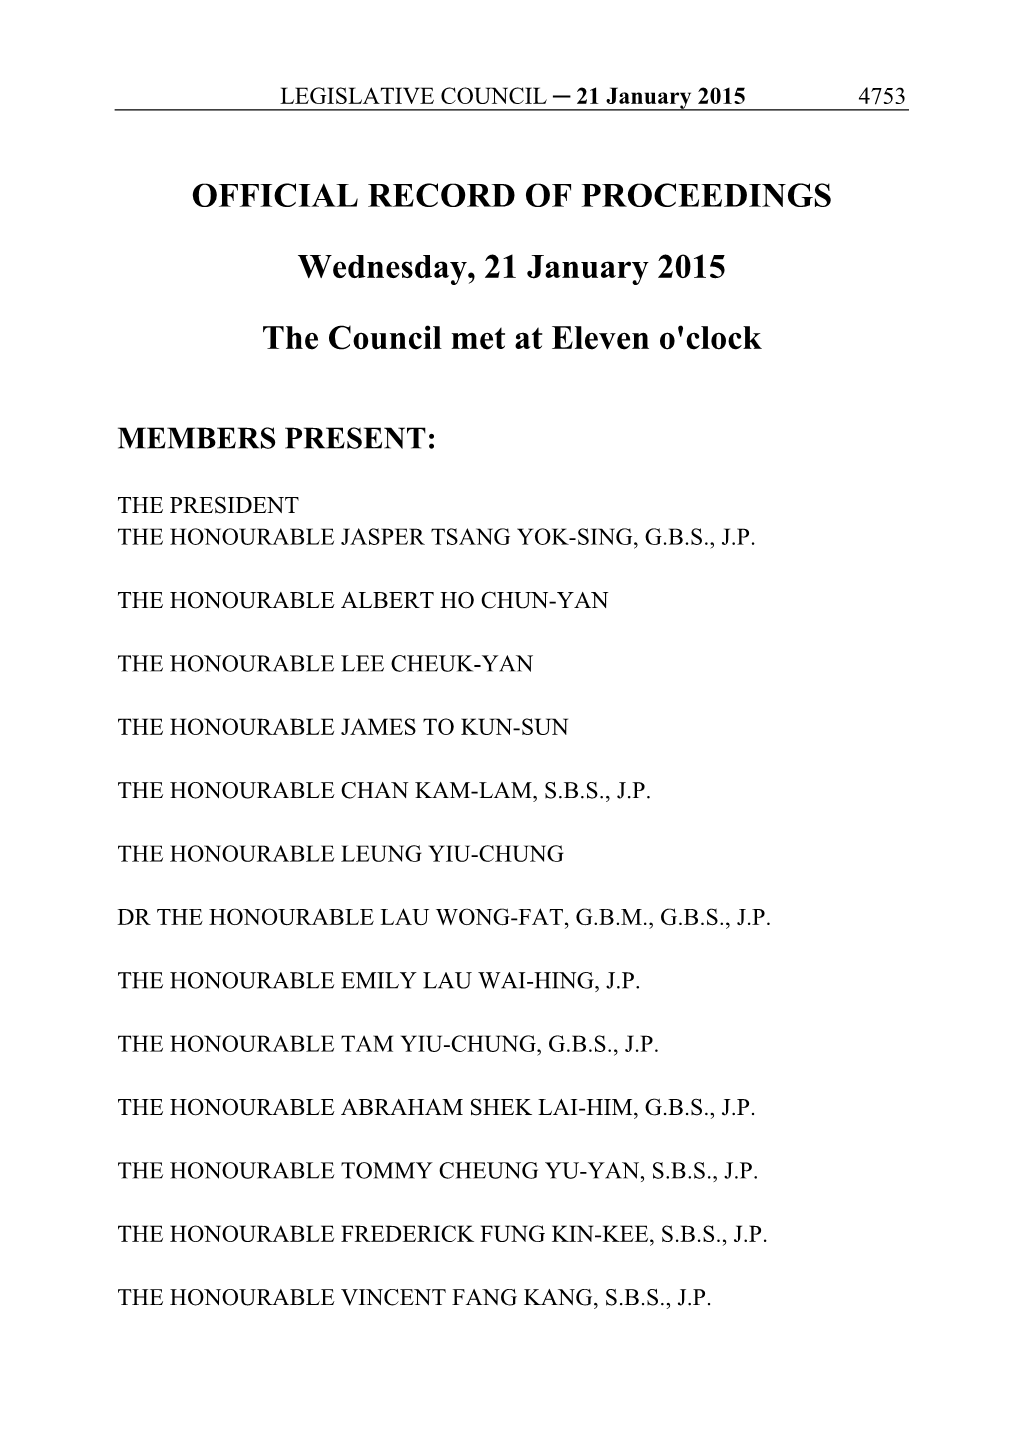 OFFICIAL RECORD of PROCEEDINGS Wednesday, 21